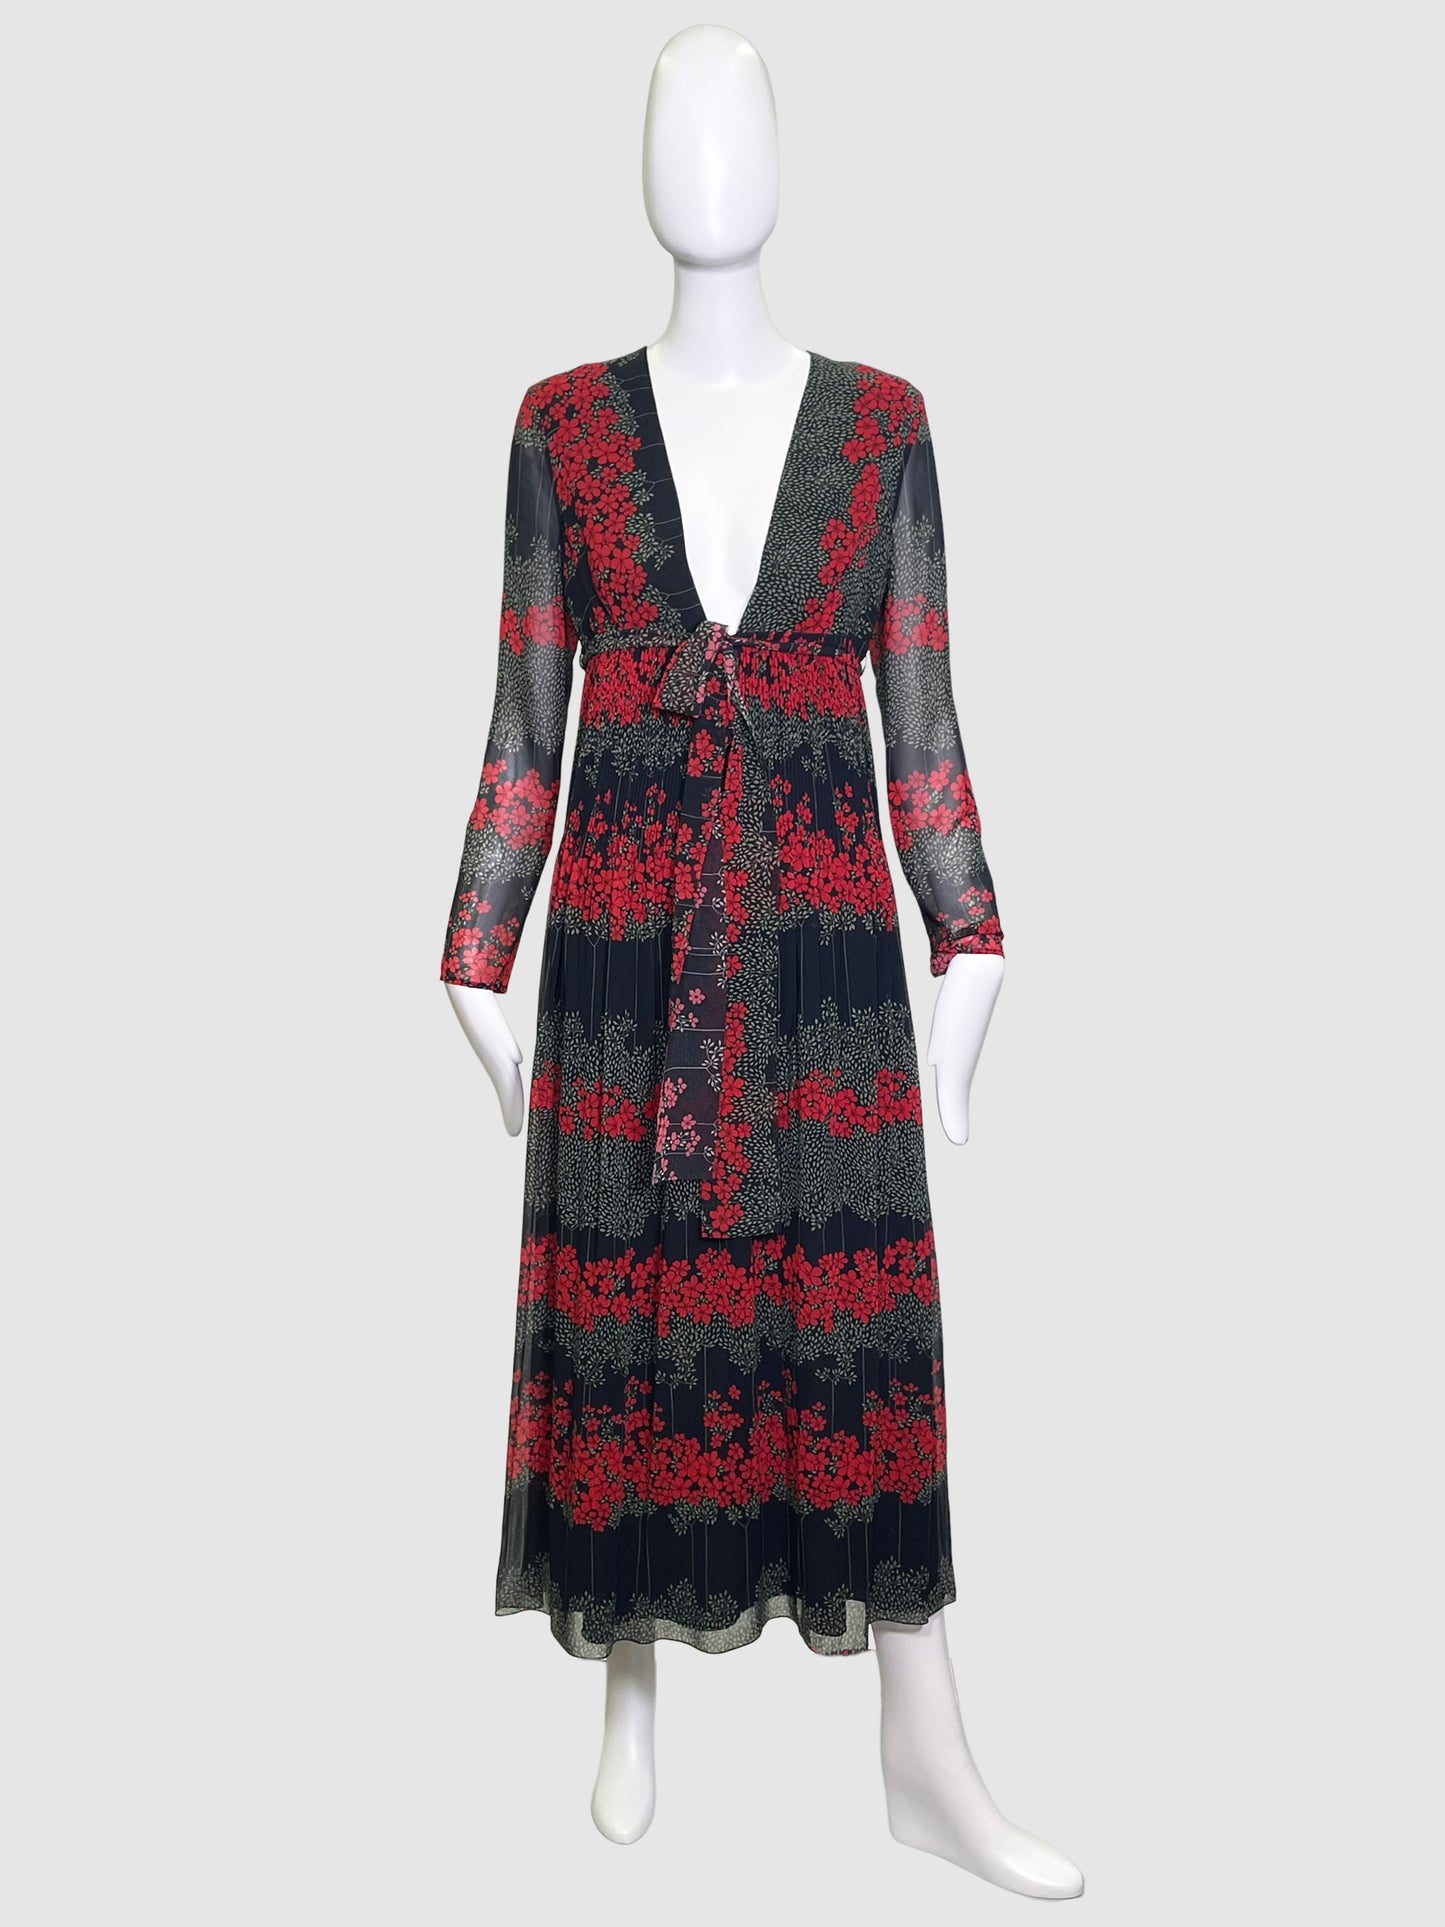 RED Valentino Floral Print Maxi Dress - Size 42